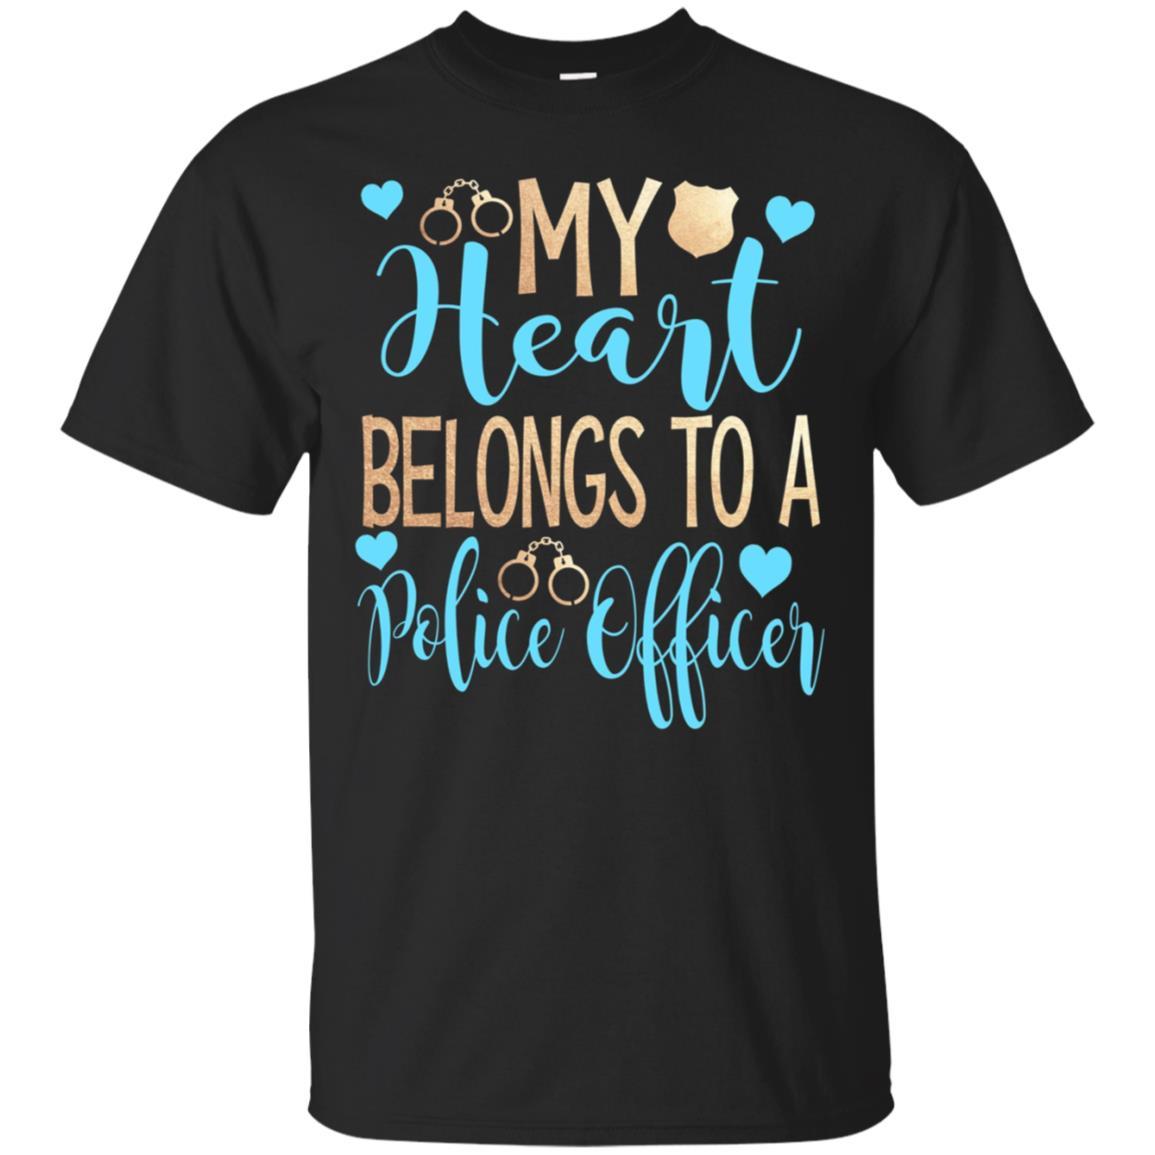 Buy My Heart Belongs To A Police Officer Shirt Police Wife Gift